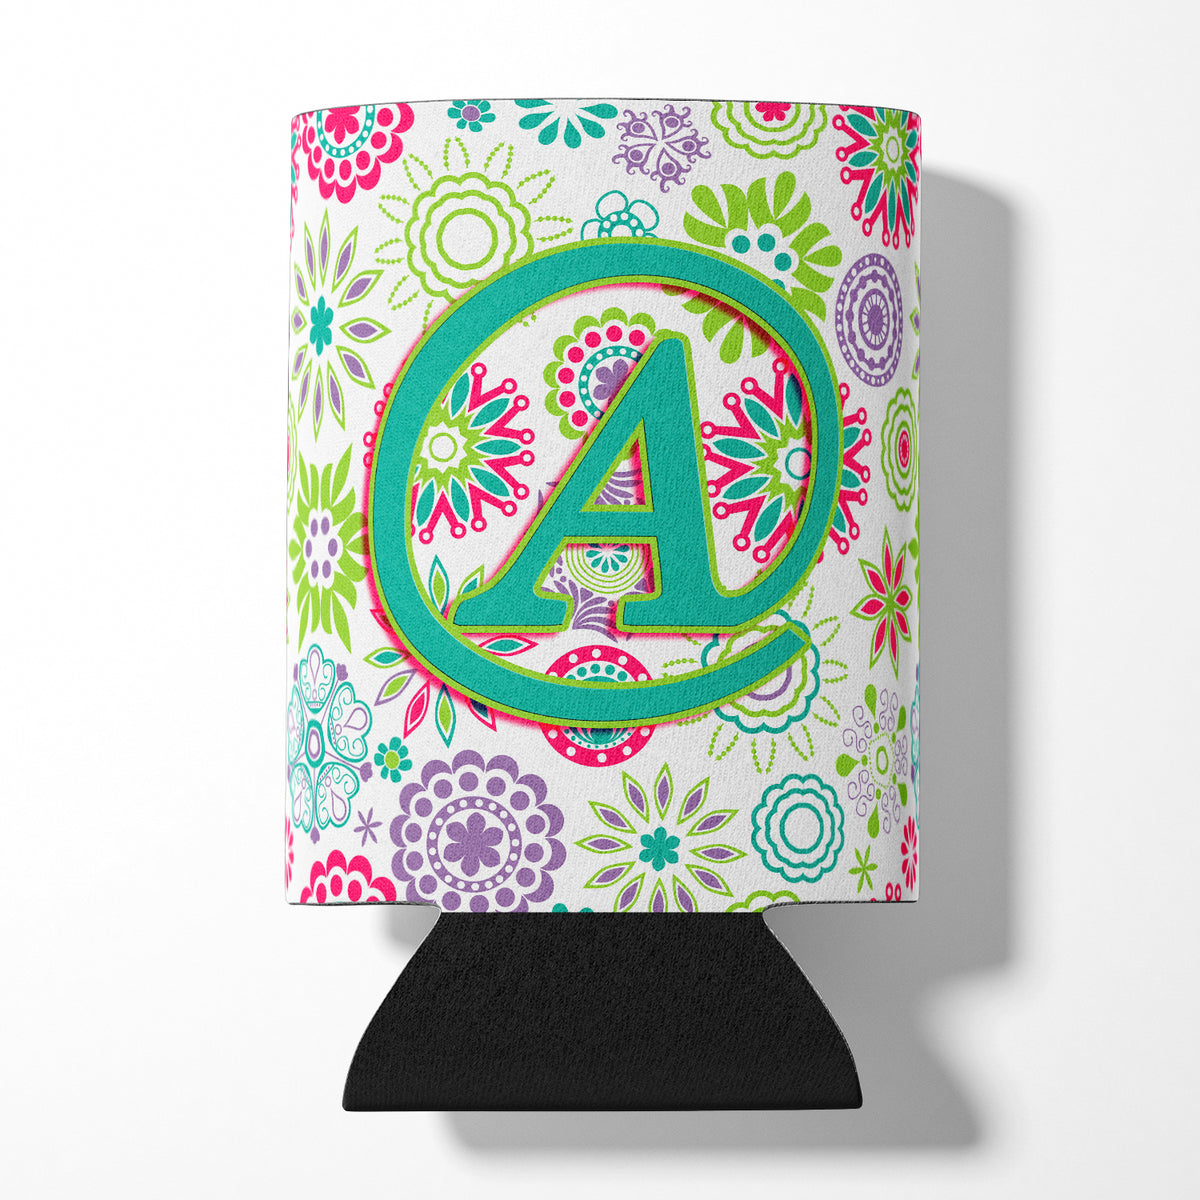 Letter A Flowers Pink Teal Green Initial Can or Bottle Hugger CJ2011-ACC